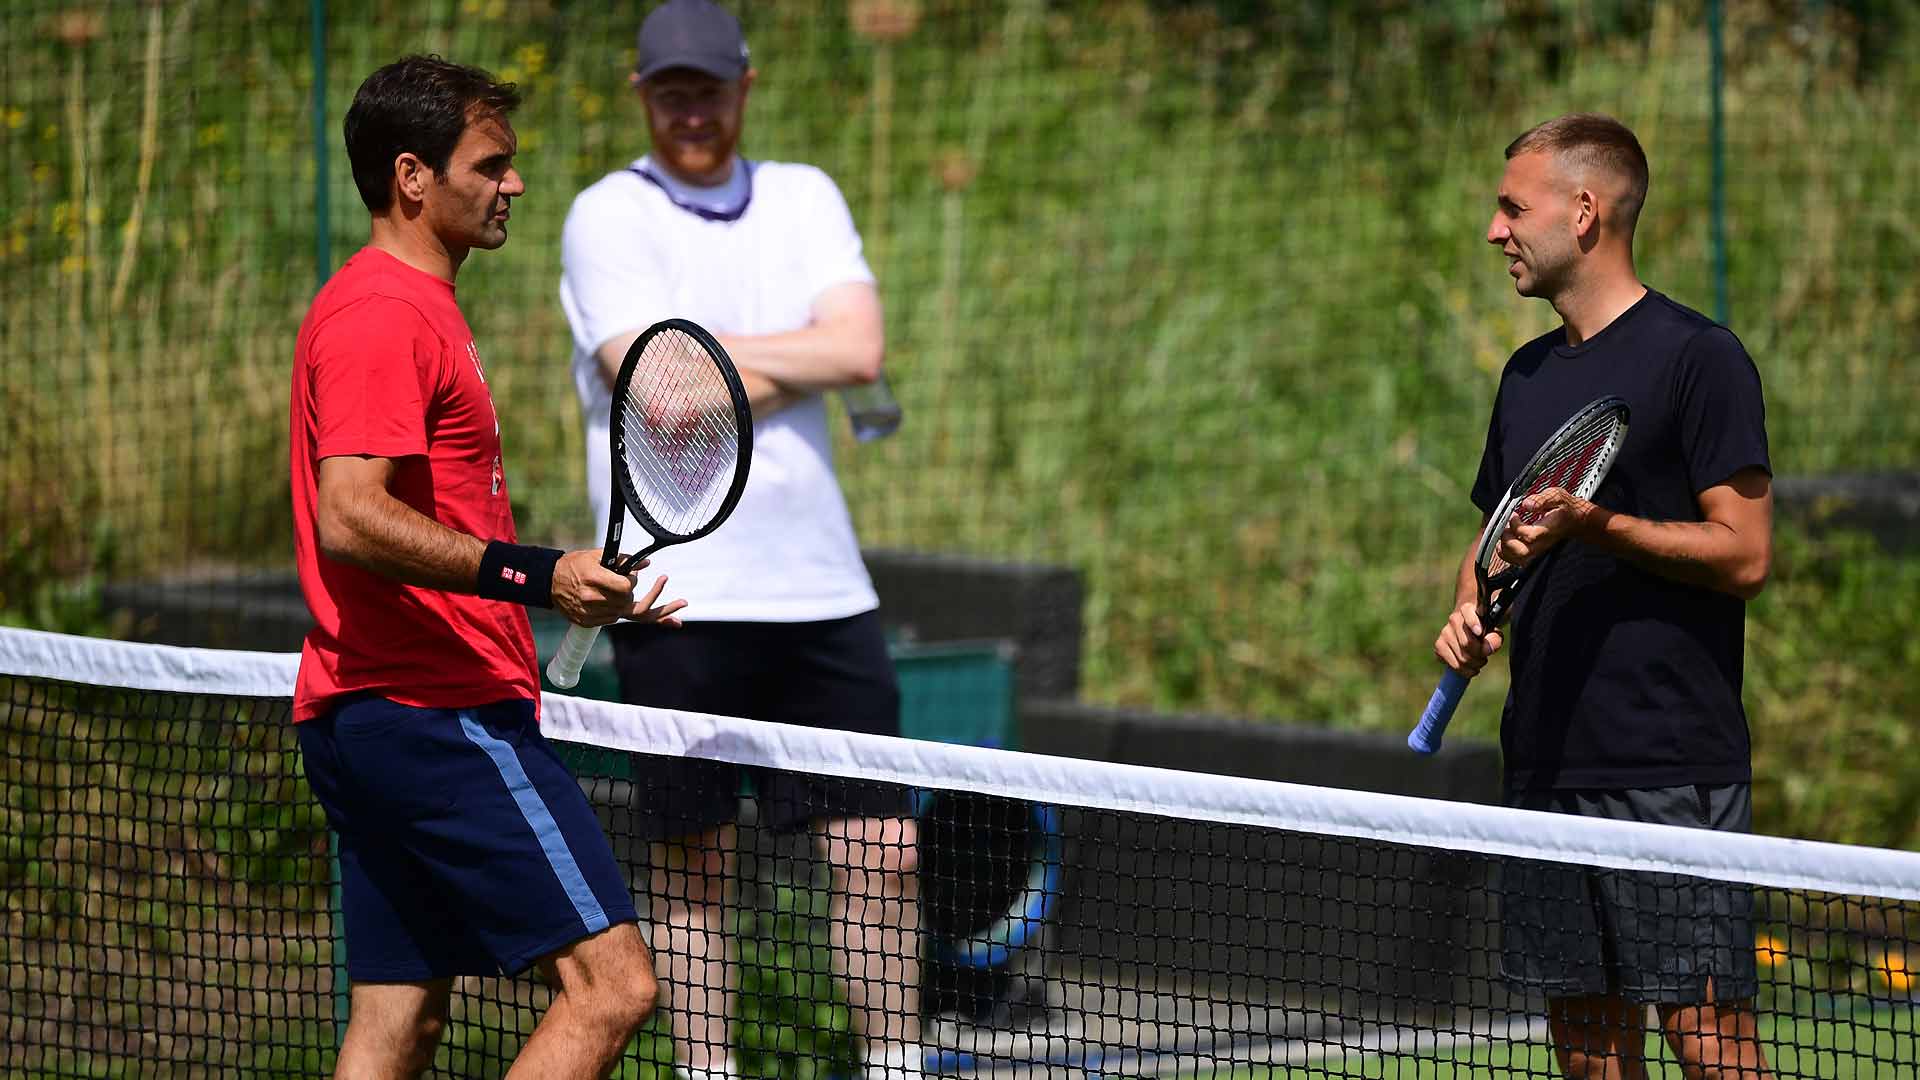 Roger Federer and Daniel Evans, who will play one another on Wednesday in Doha, have frequently practised together in recent years.